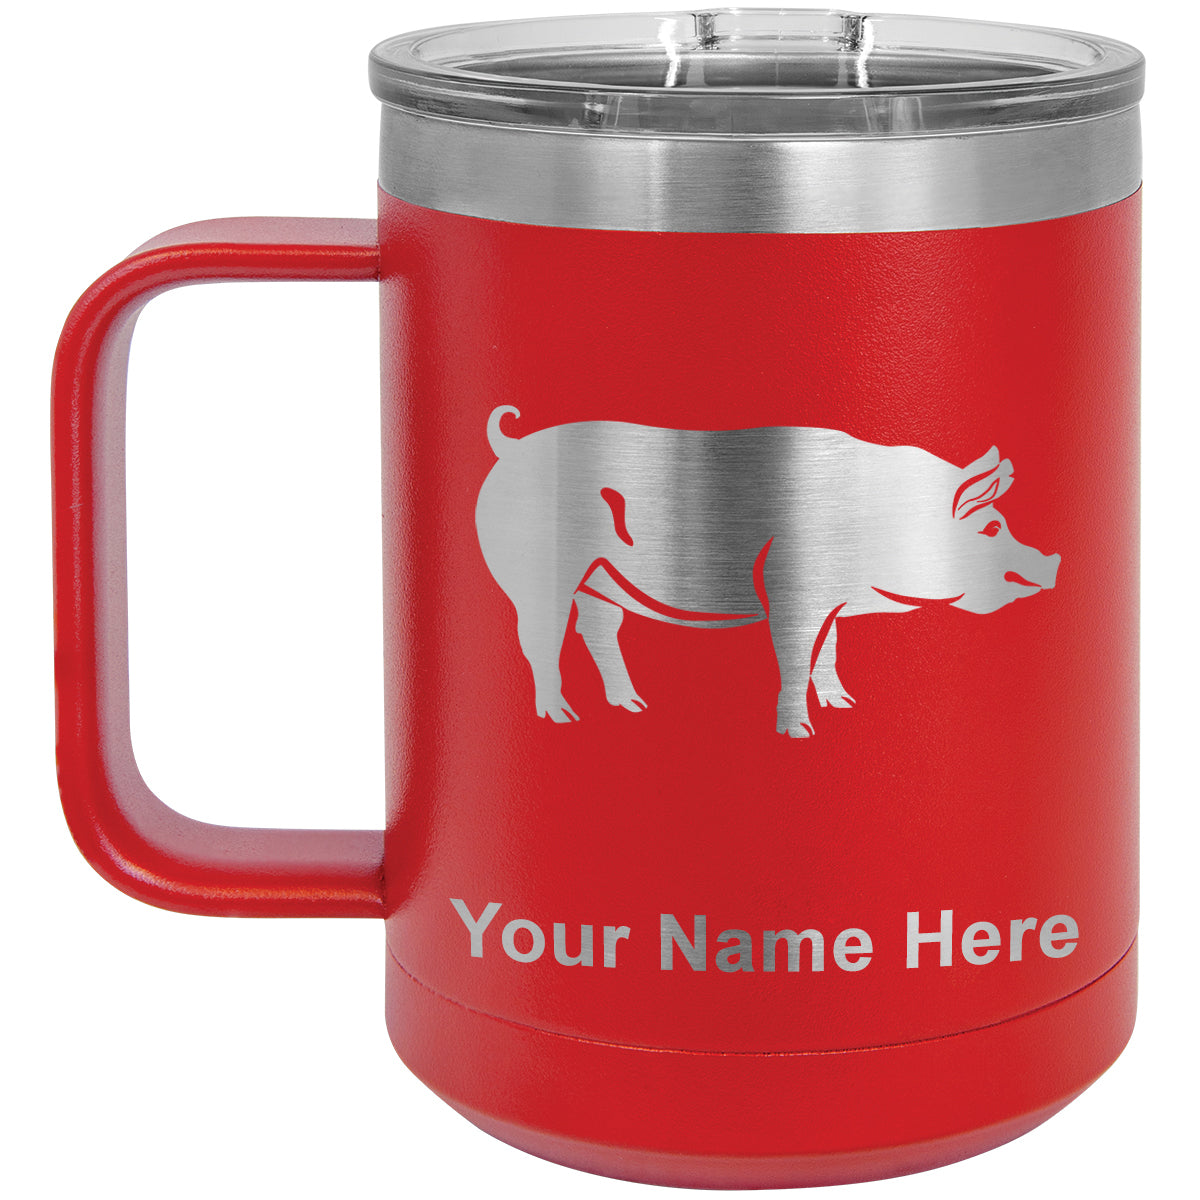 15oz Vacuum Insulated Coffee Mug, Pig, Personalized Engraving Included